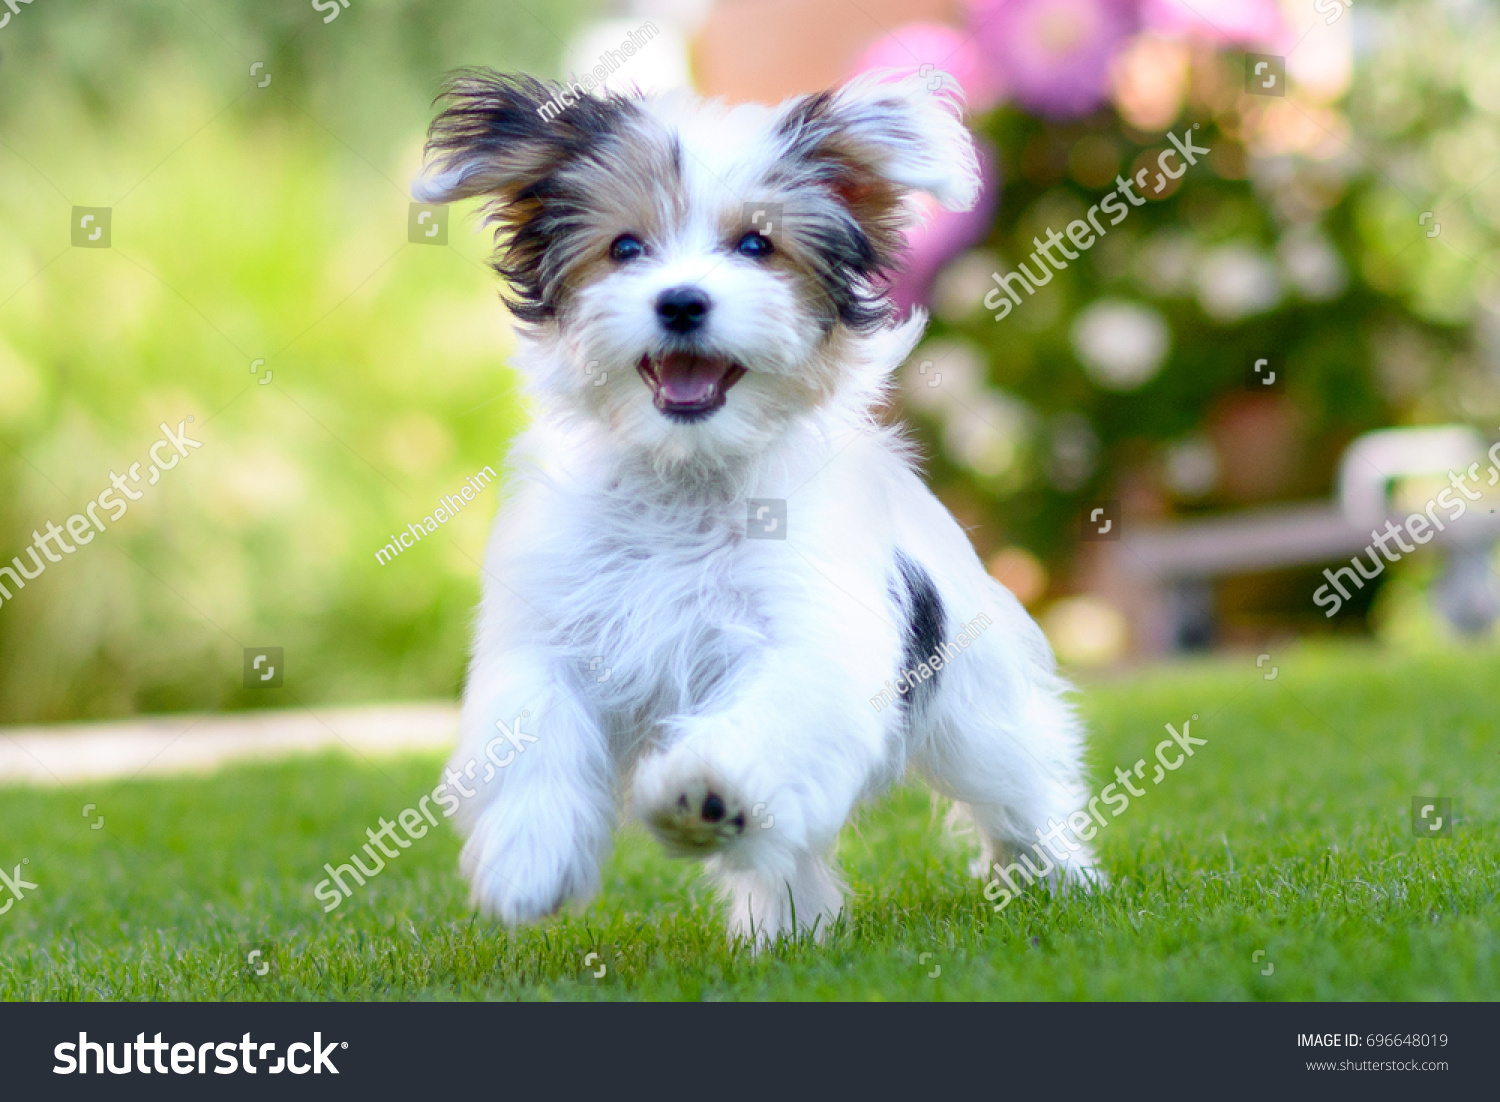 An adorable, happy puppy caught in motion while running on vibrant green grass in summer. #696648019